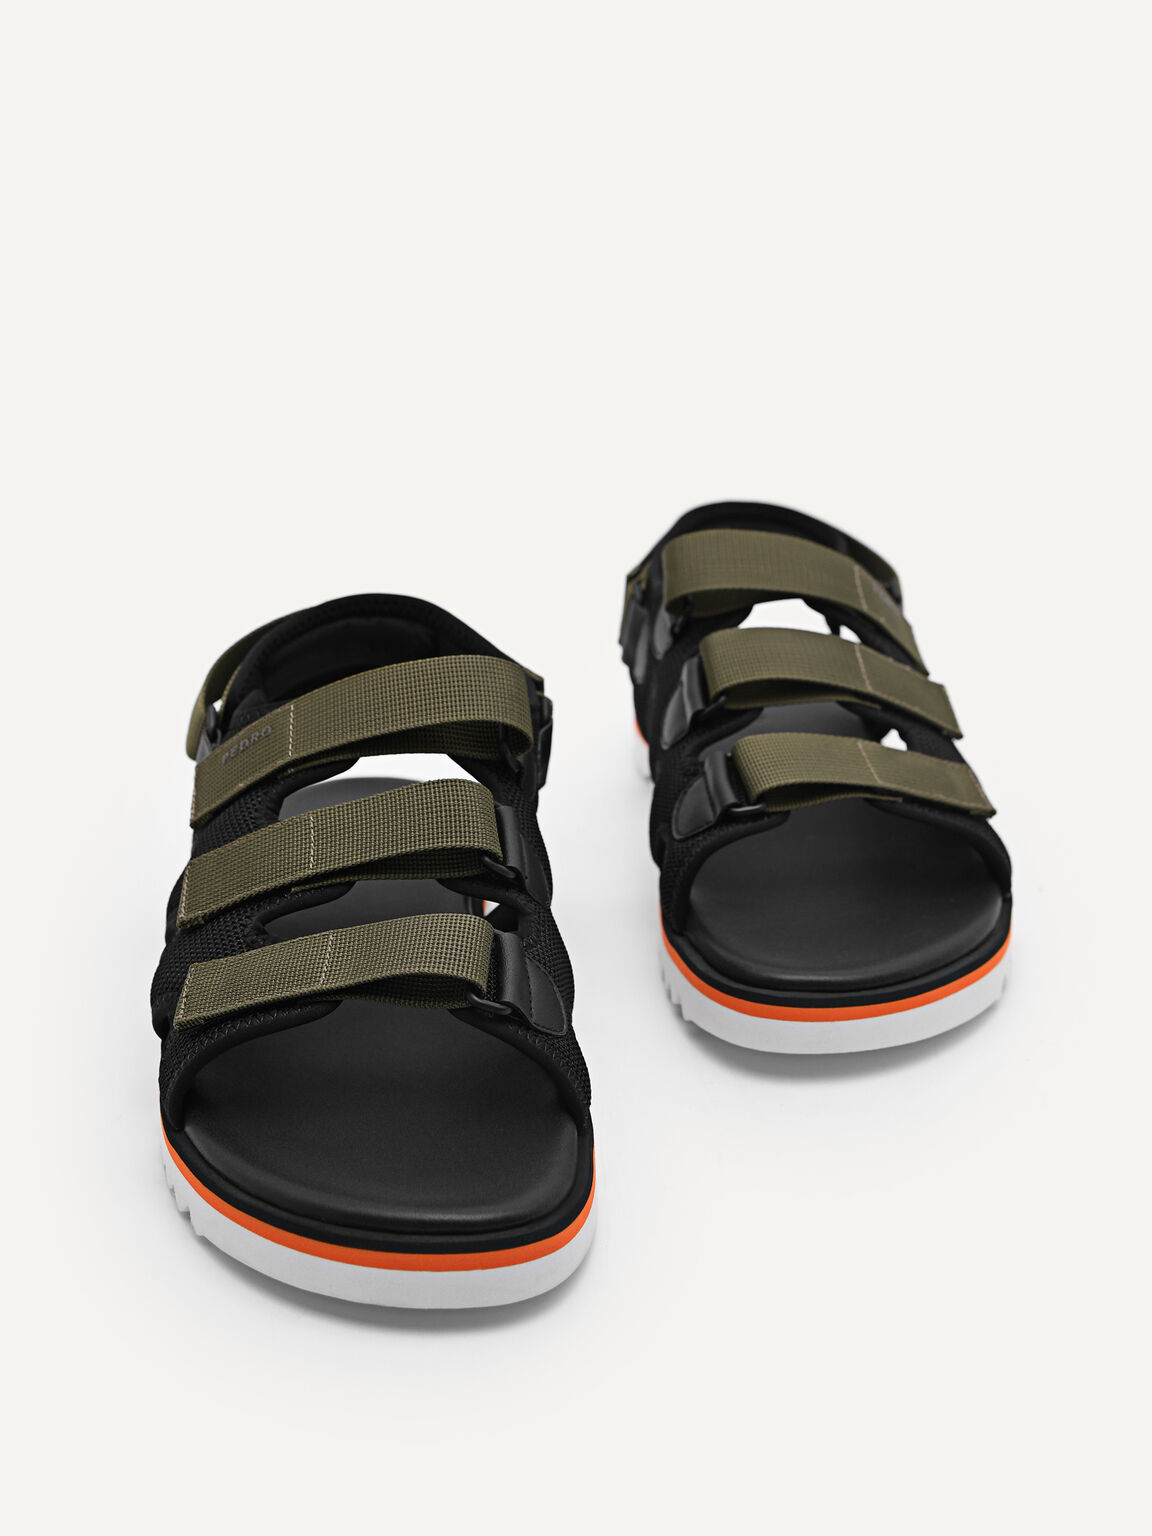 Contrasting Technical Sandals, Black